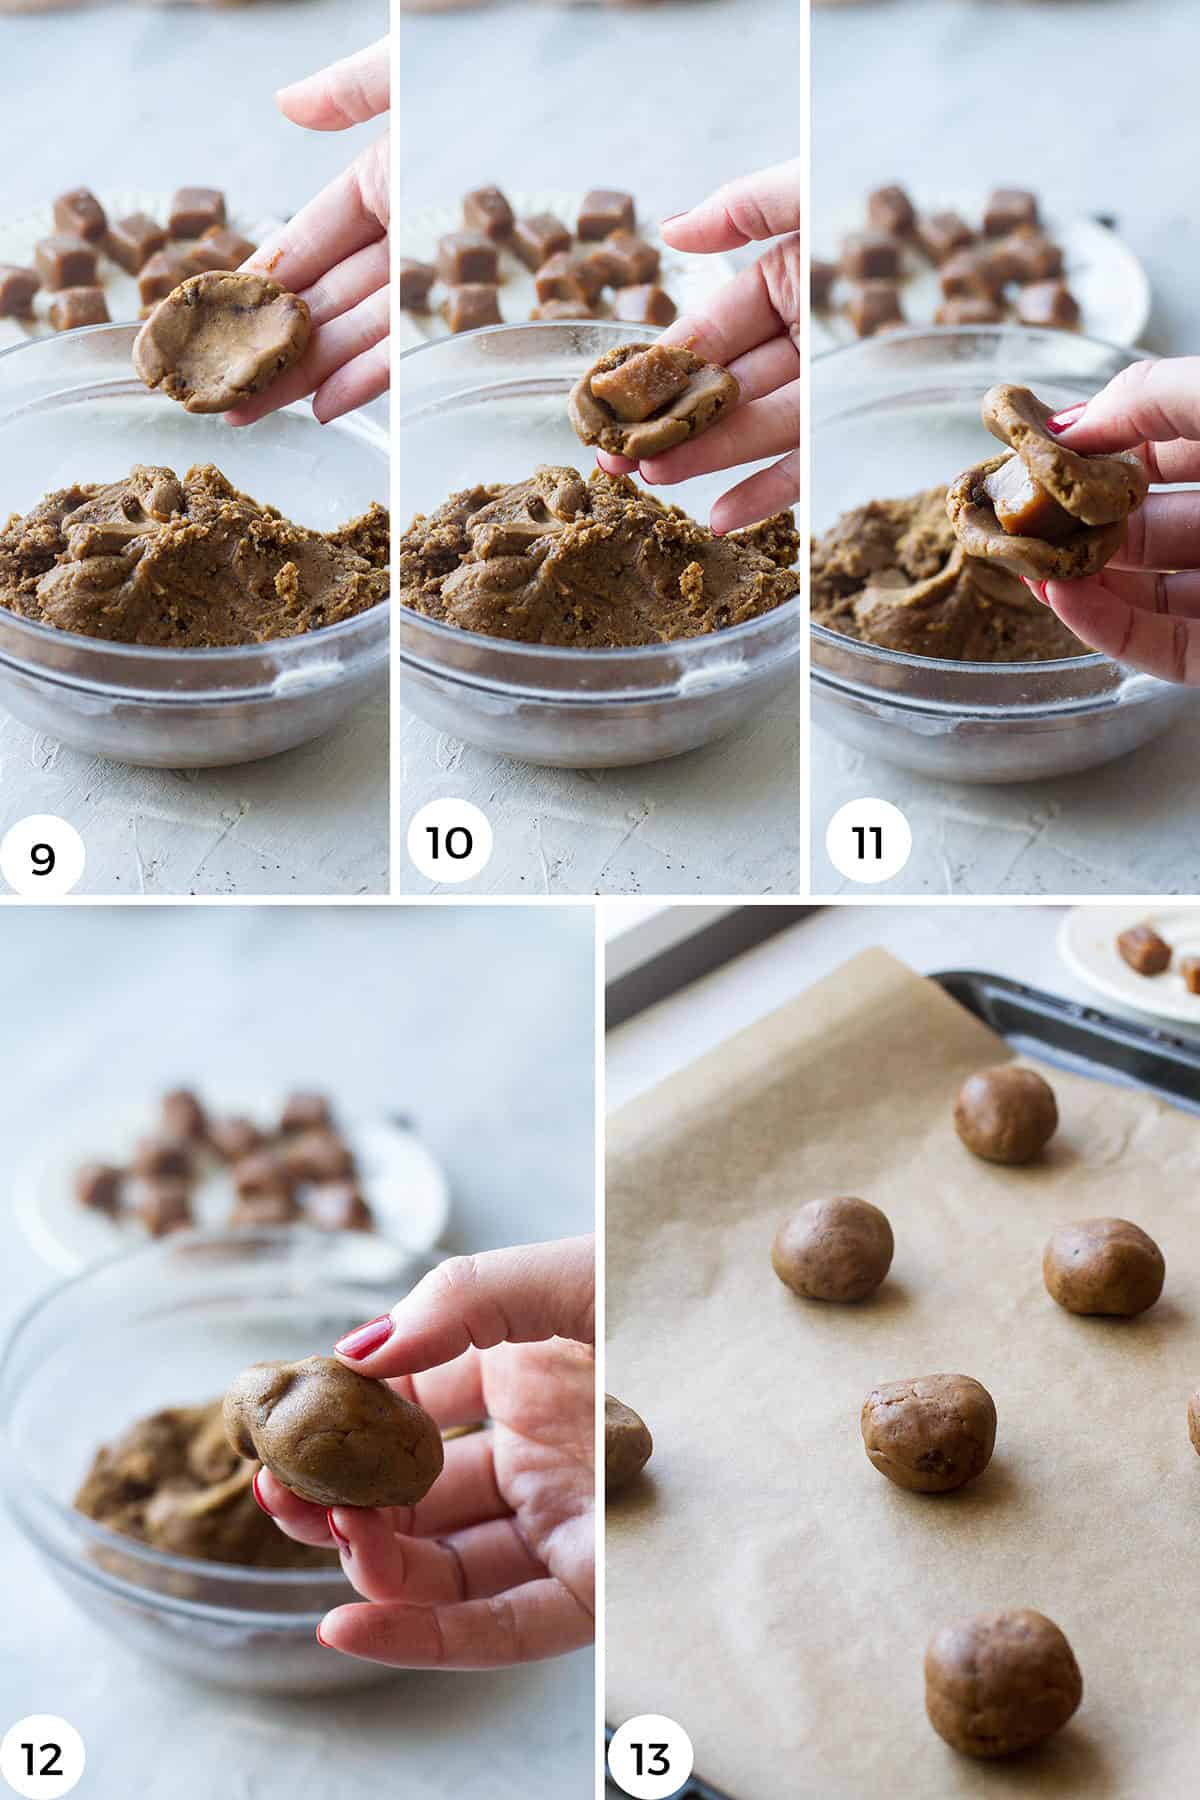 Steps on how to shape the cookie balls.